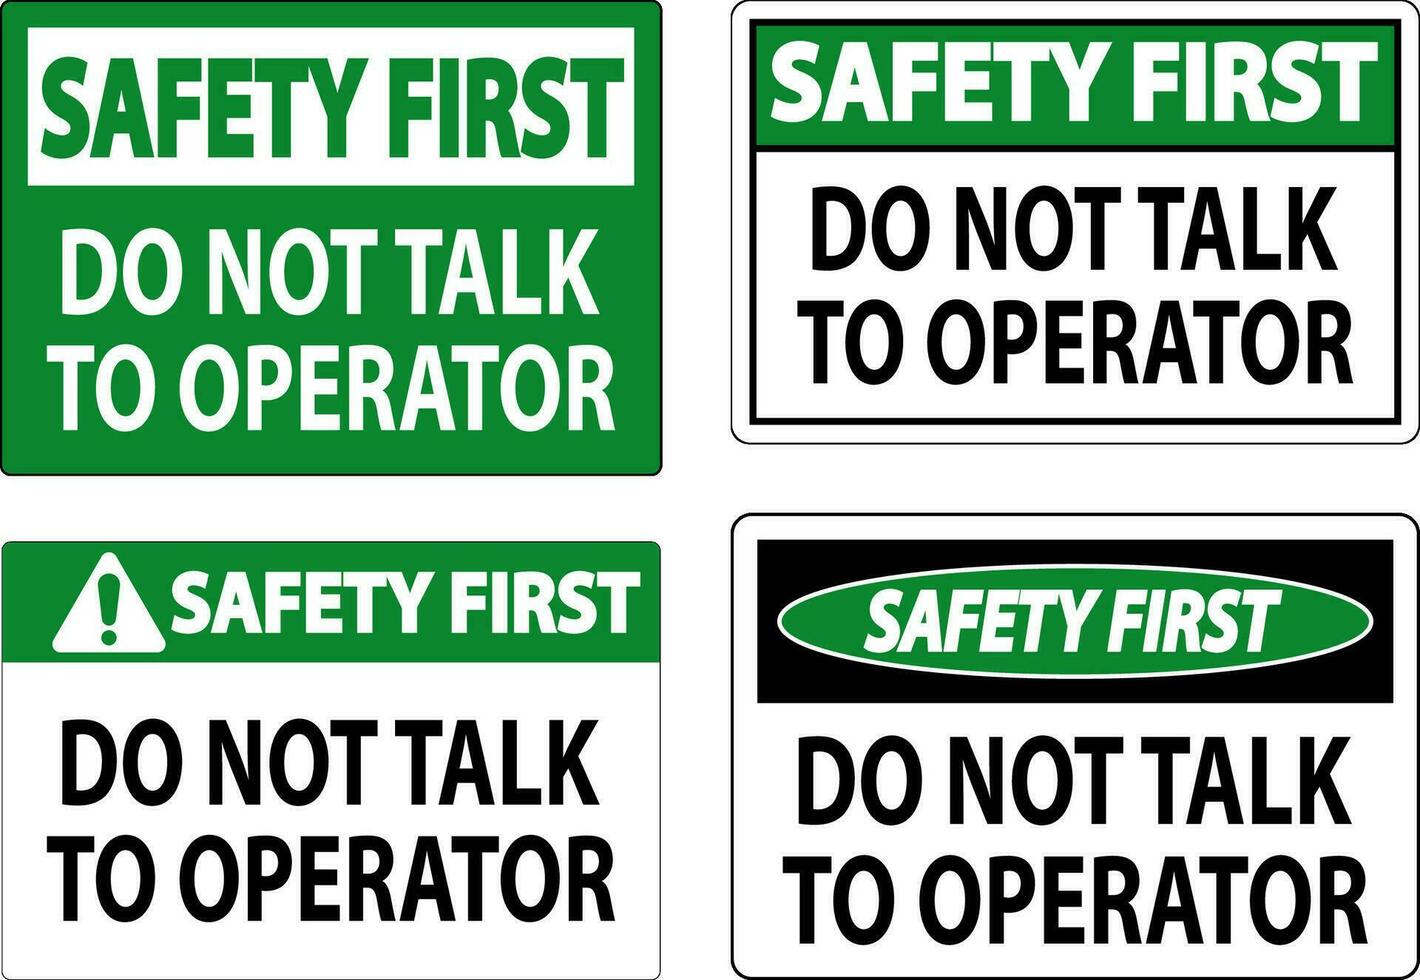 Safety First Sign Do Not Talk To Operator vector